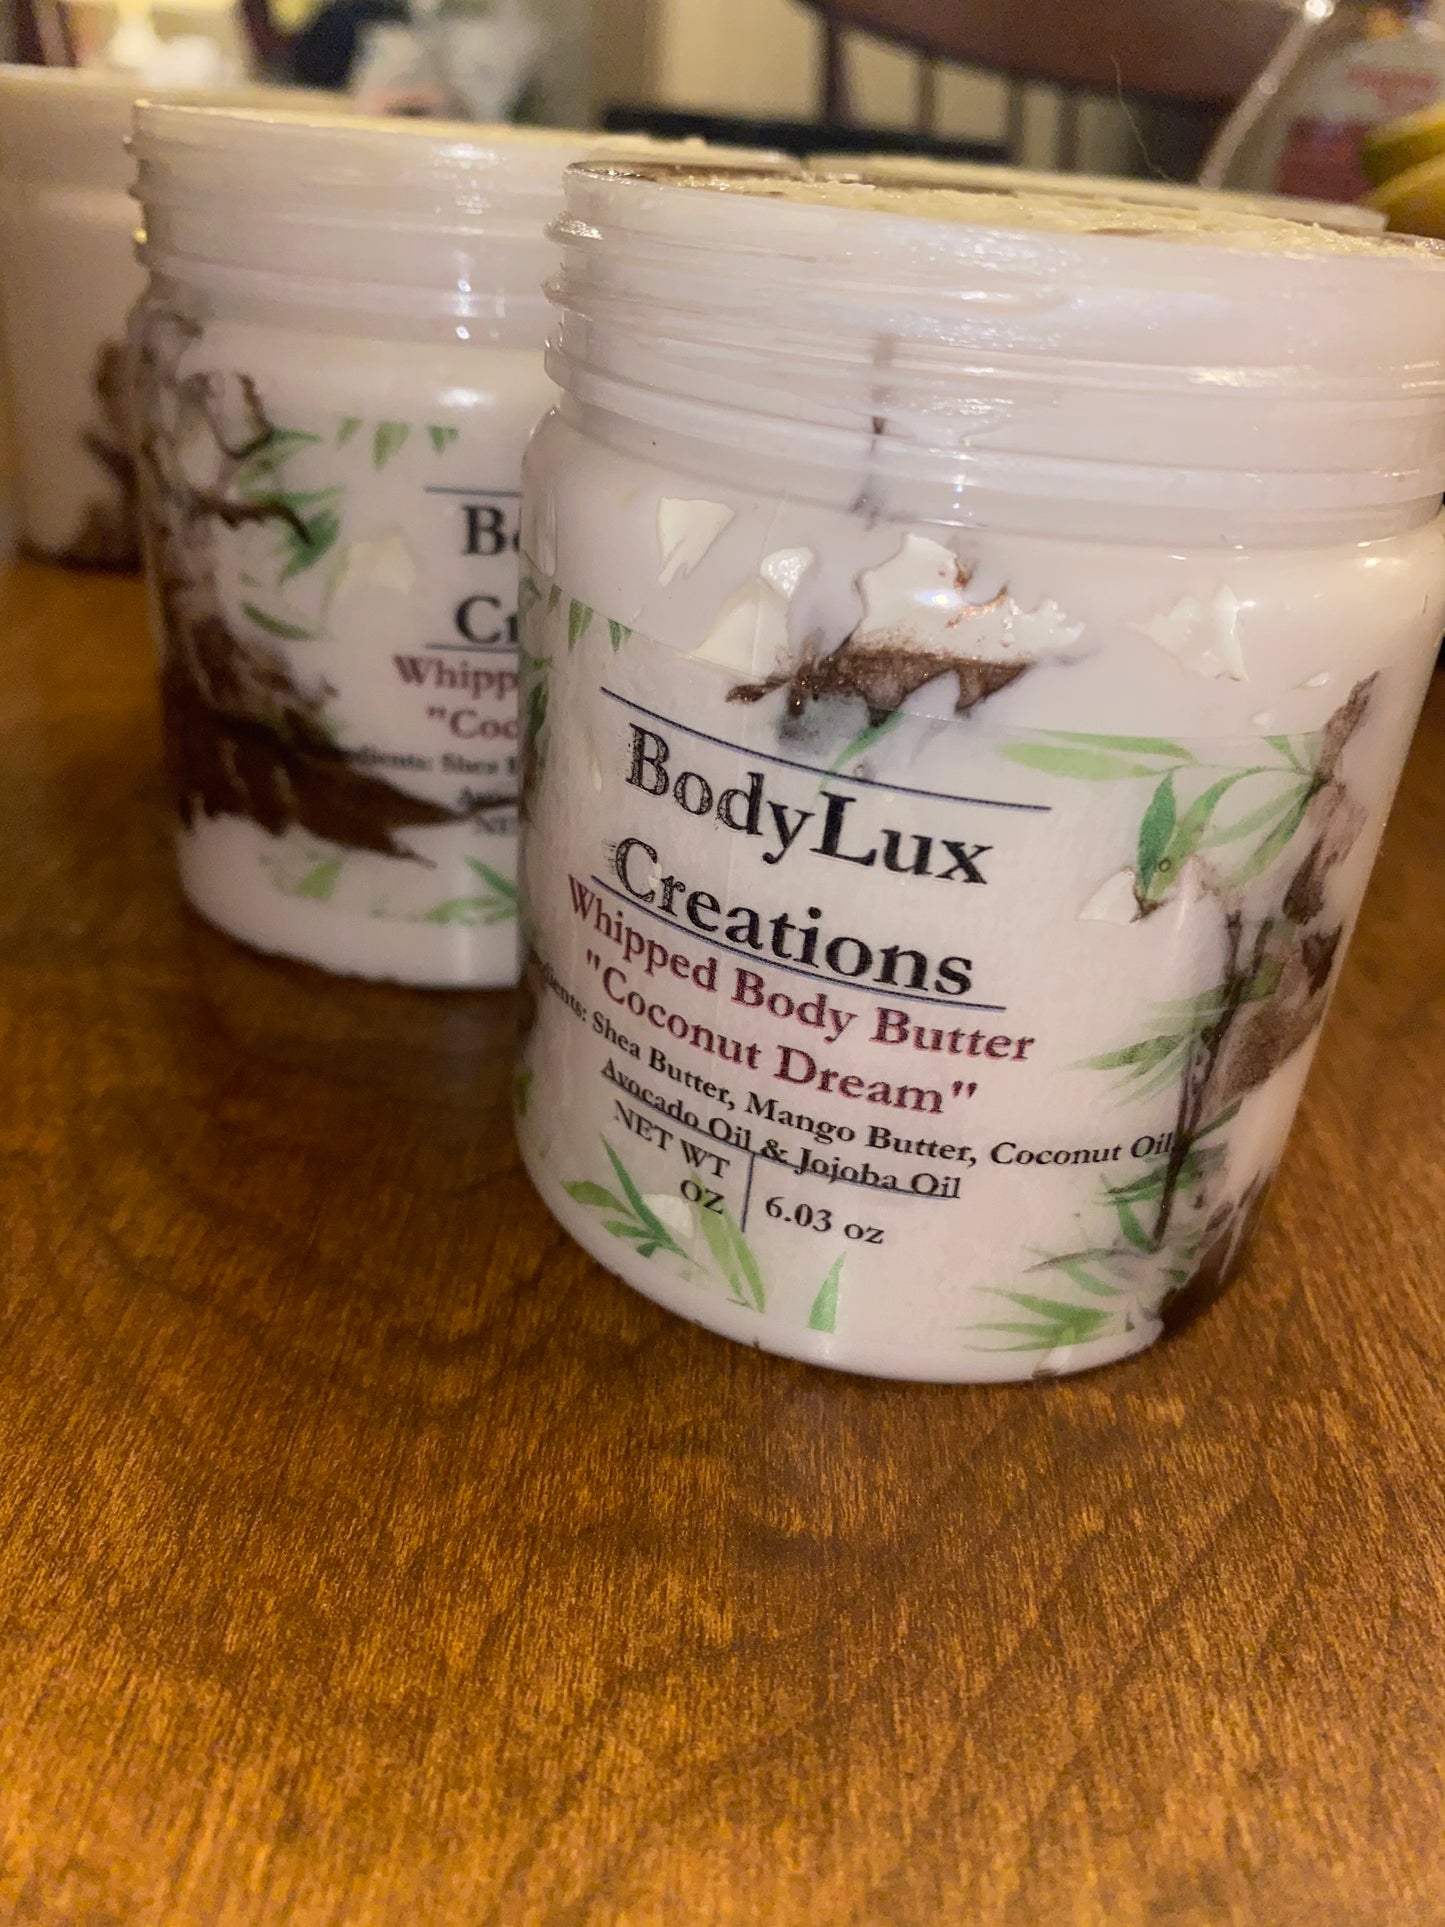 Whipped Body Butter “Coconut Dreams”